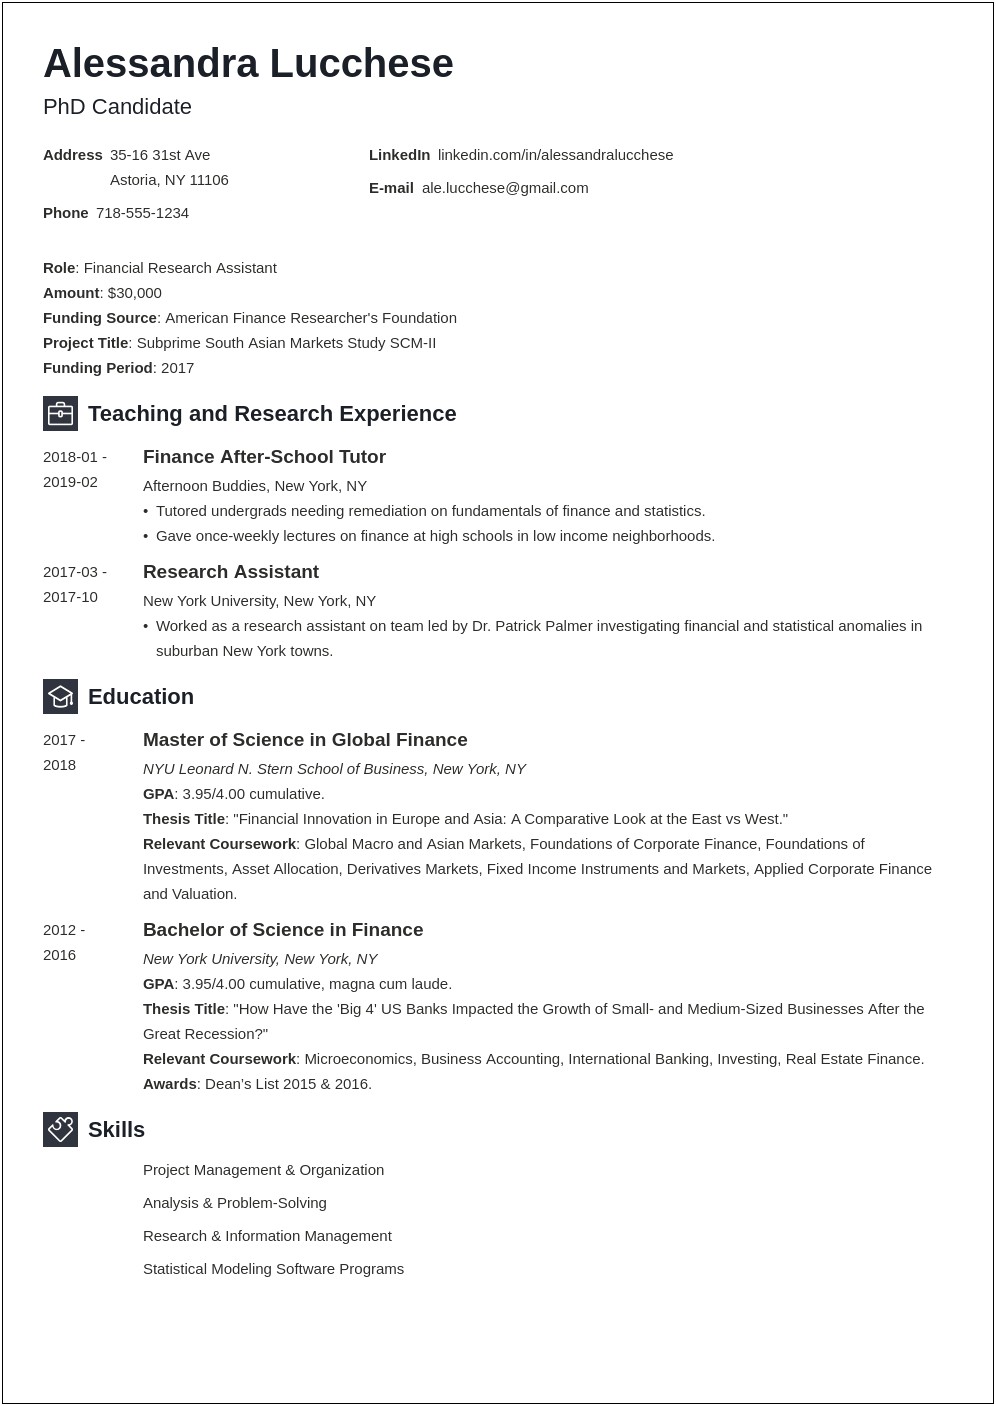 Resume Email Address For Graduate School